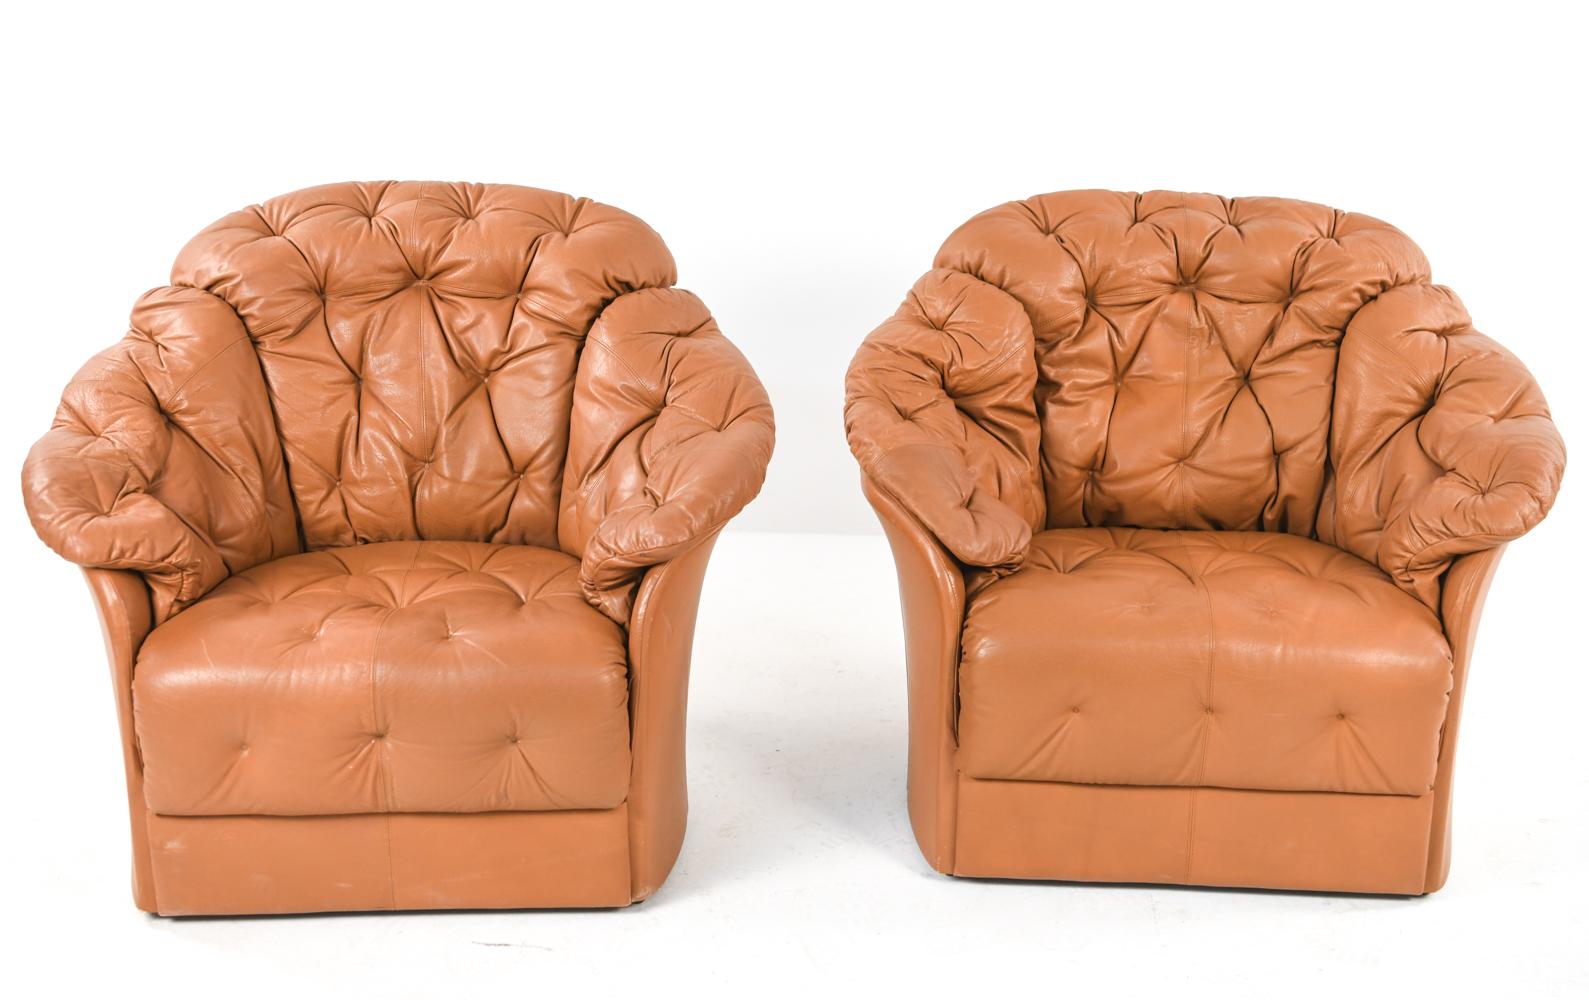 A rare pair of Skipper Mobler Danish modern over-stuffed tufted cognac leather lounge chairs epitomizing comfort. With Skipper Furniture label underneath.